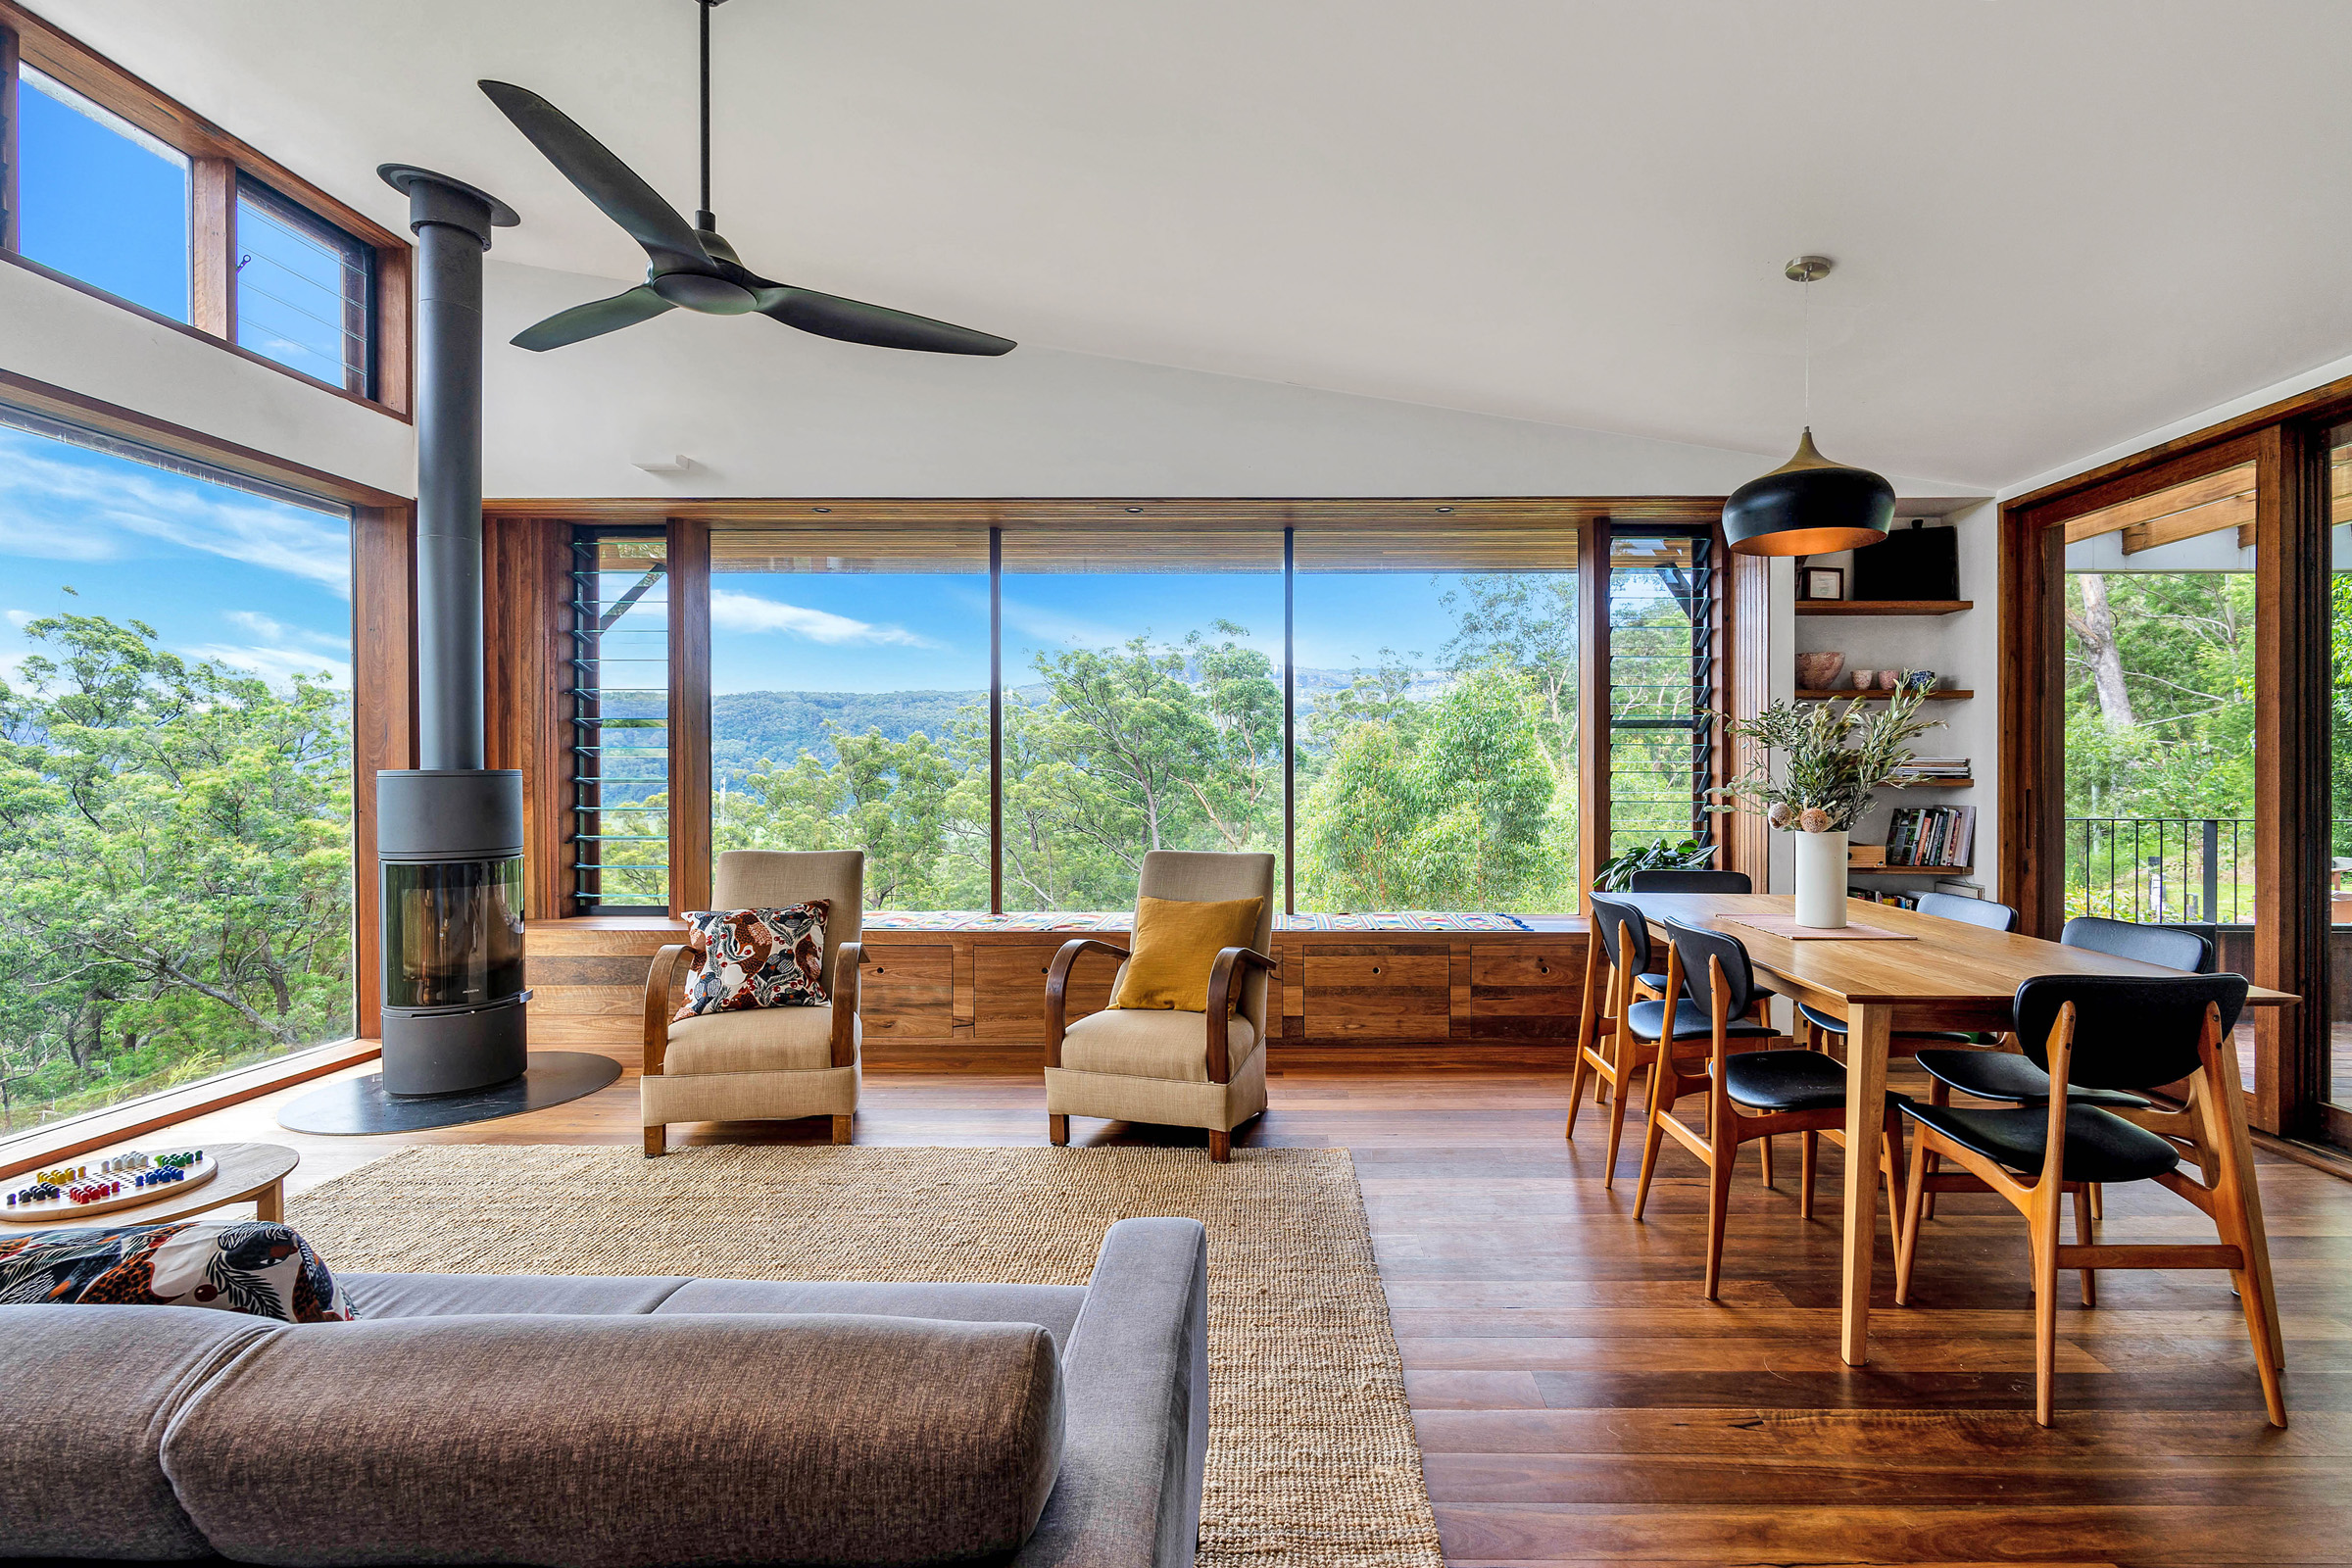 The very best of views, nature and design meet in Kangaroo Valley